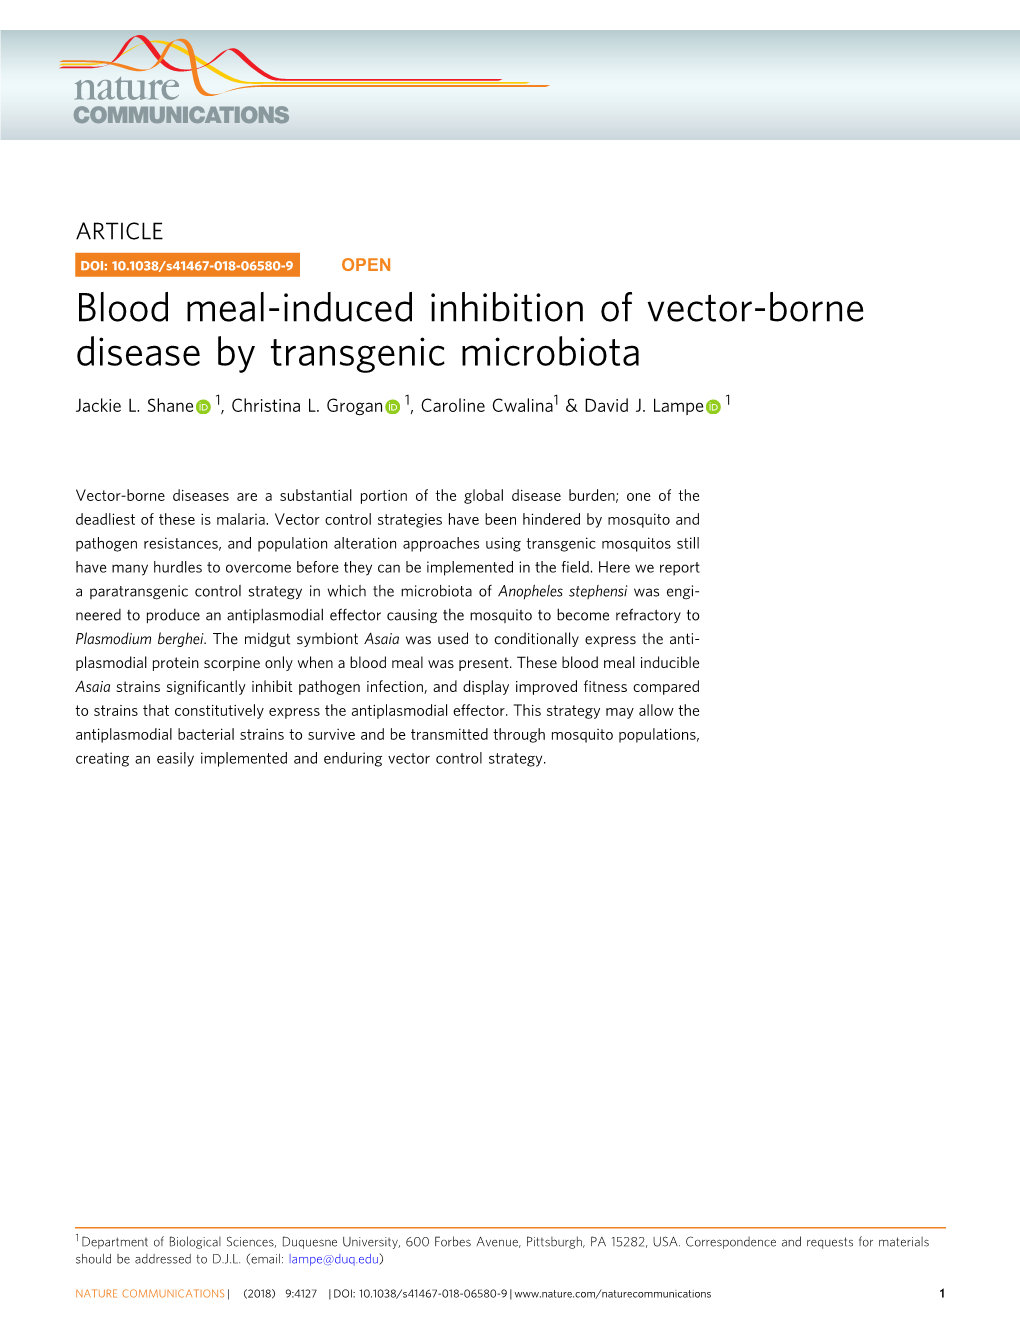 Blood Meal-Induced Inhibition of Vector-Borne Disease by Transgenic Microbiota